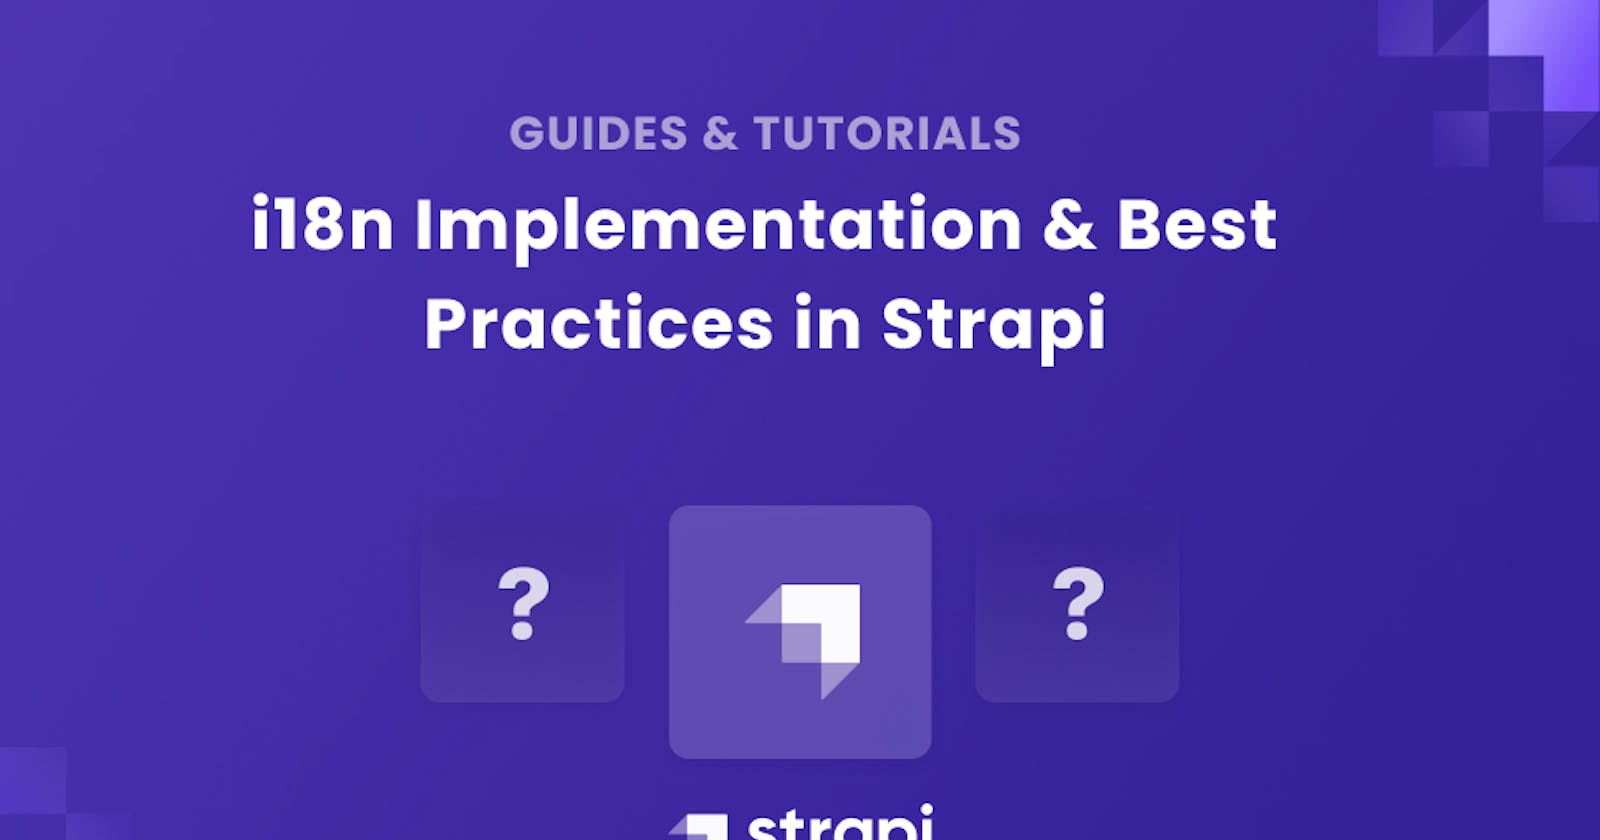 i18n implementation and Best Practices in Strapi